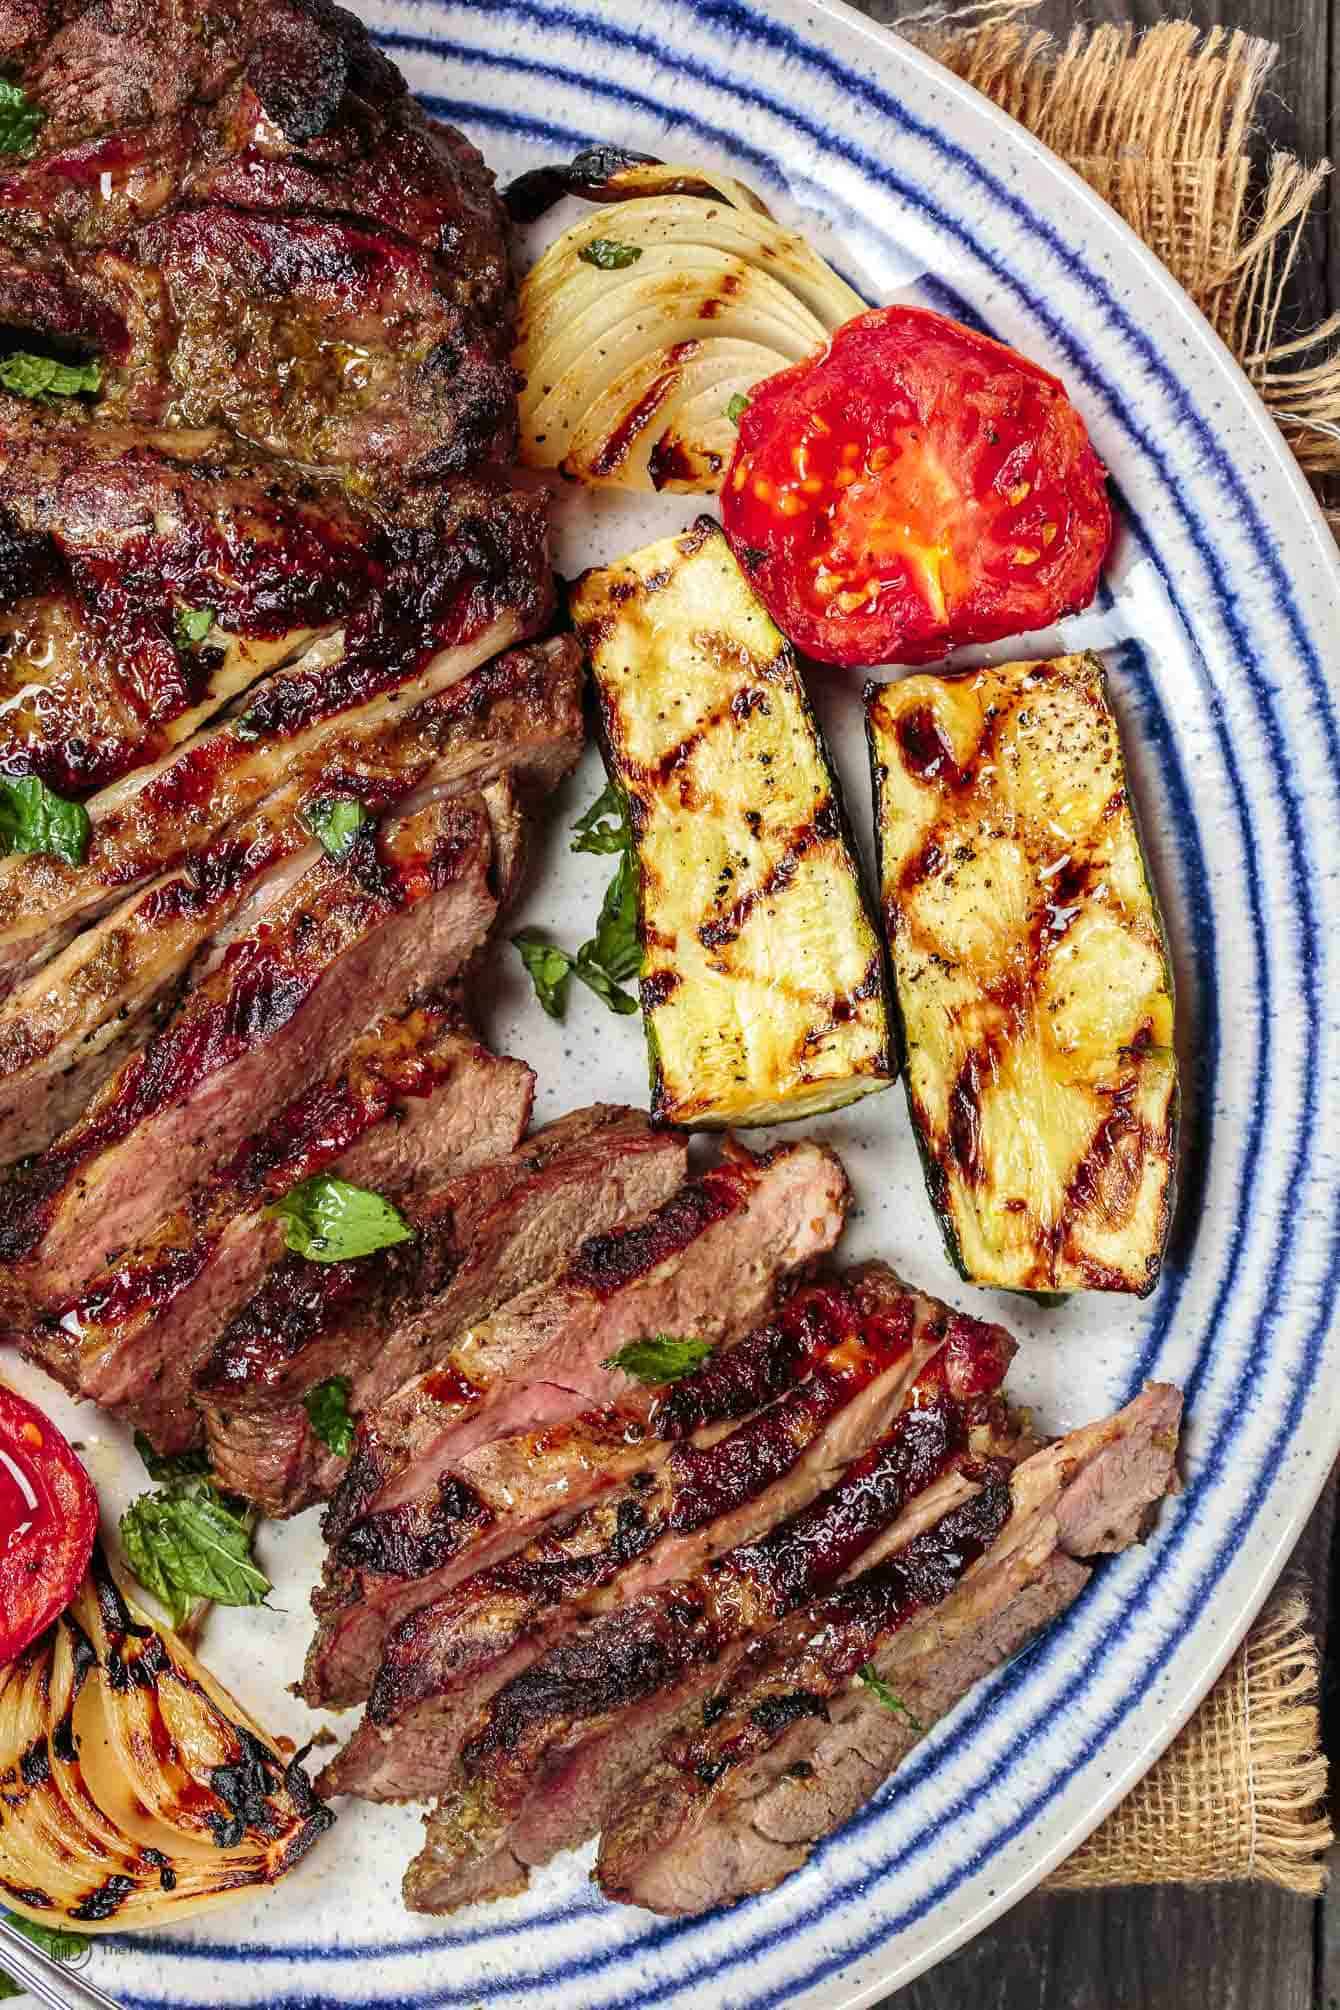 Grilled Lamb served with grilled zucchini and tomatoes